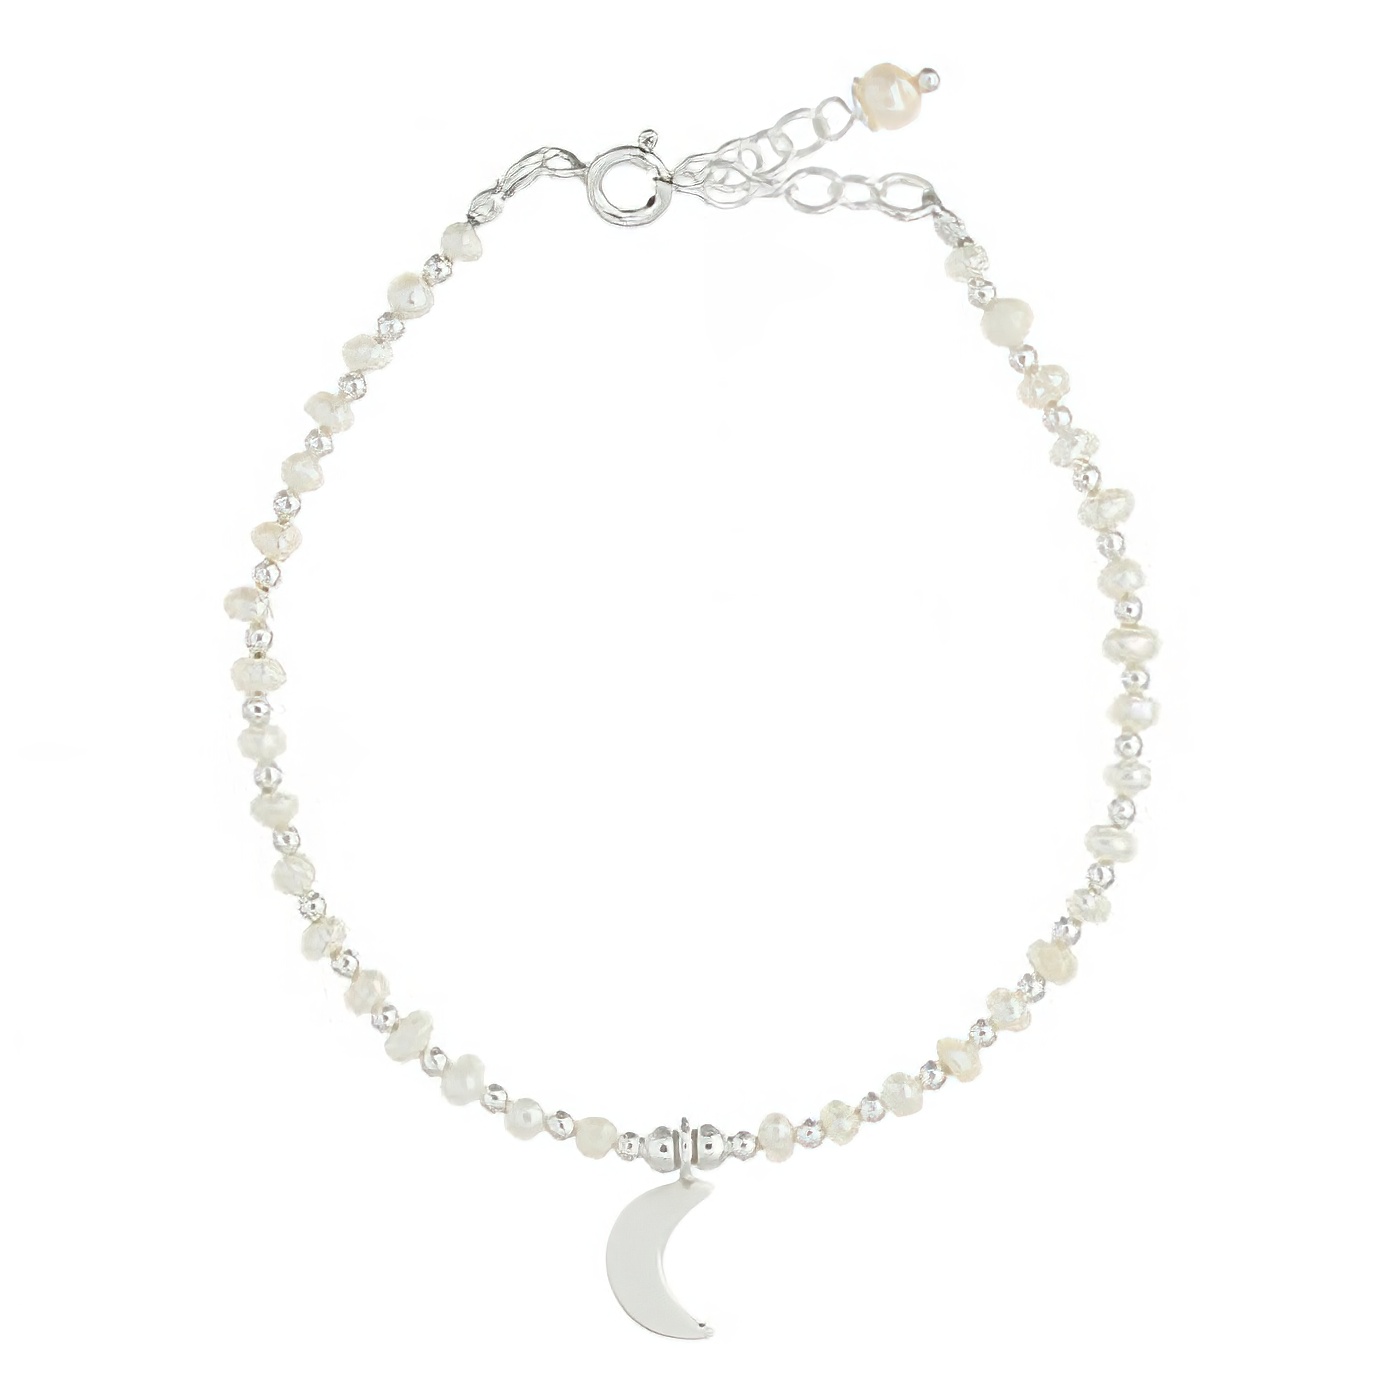 Classy Freshwater Pearl and a Moon Charm Bracelet 